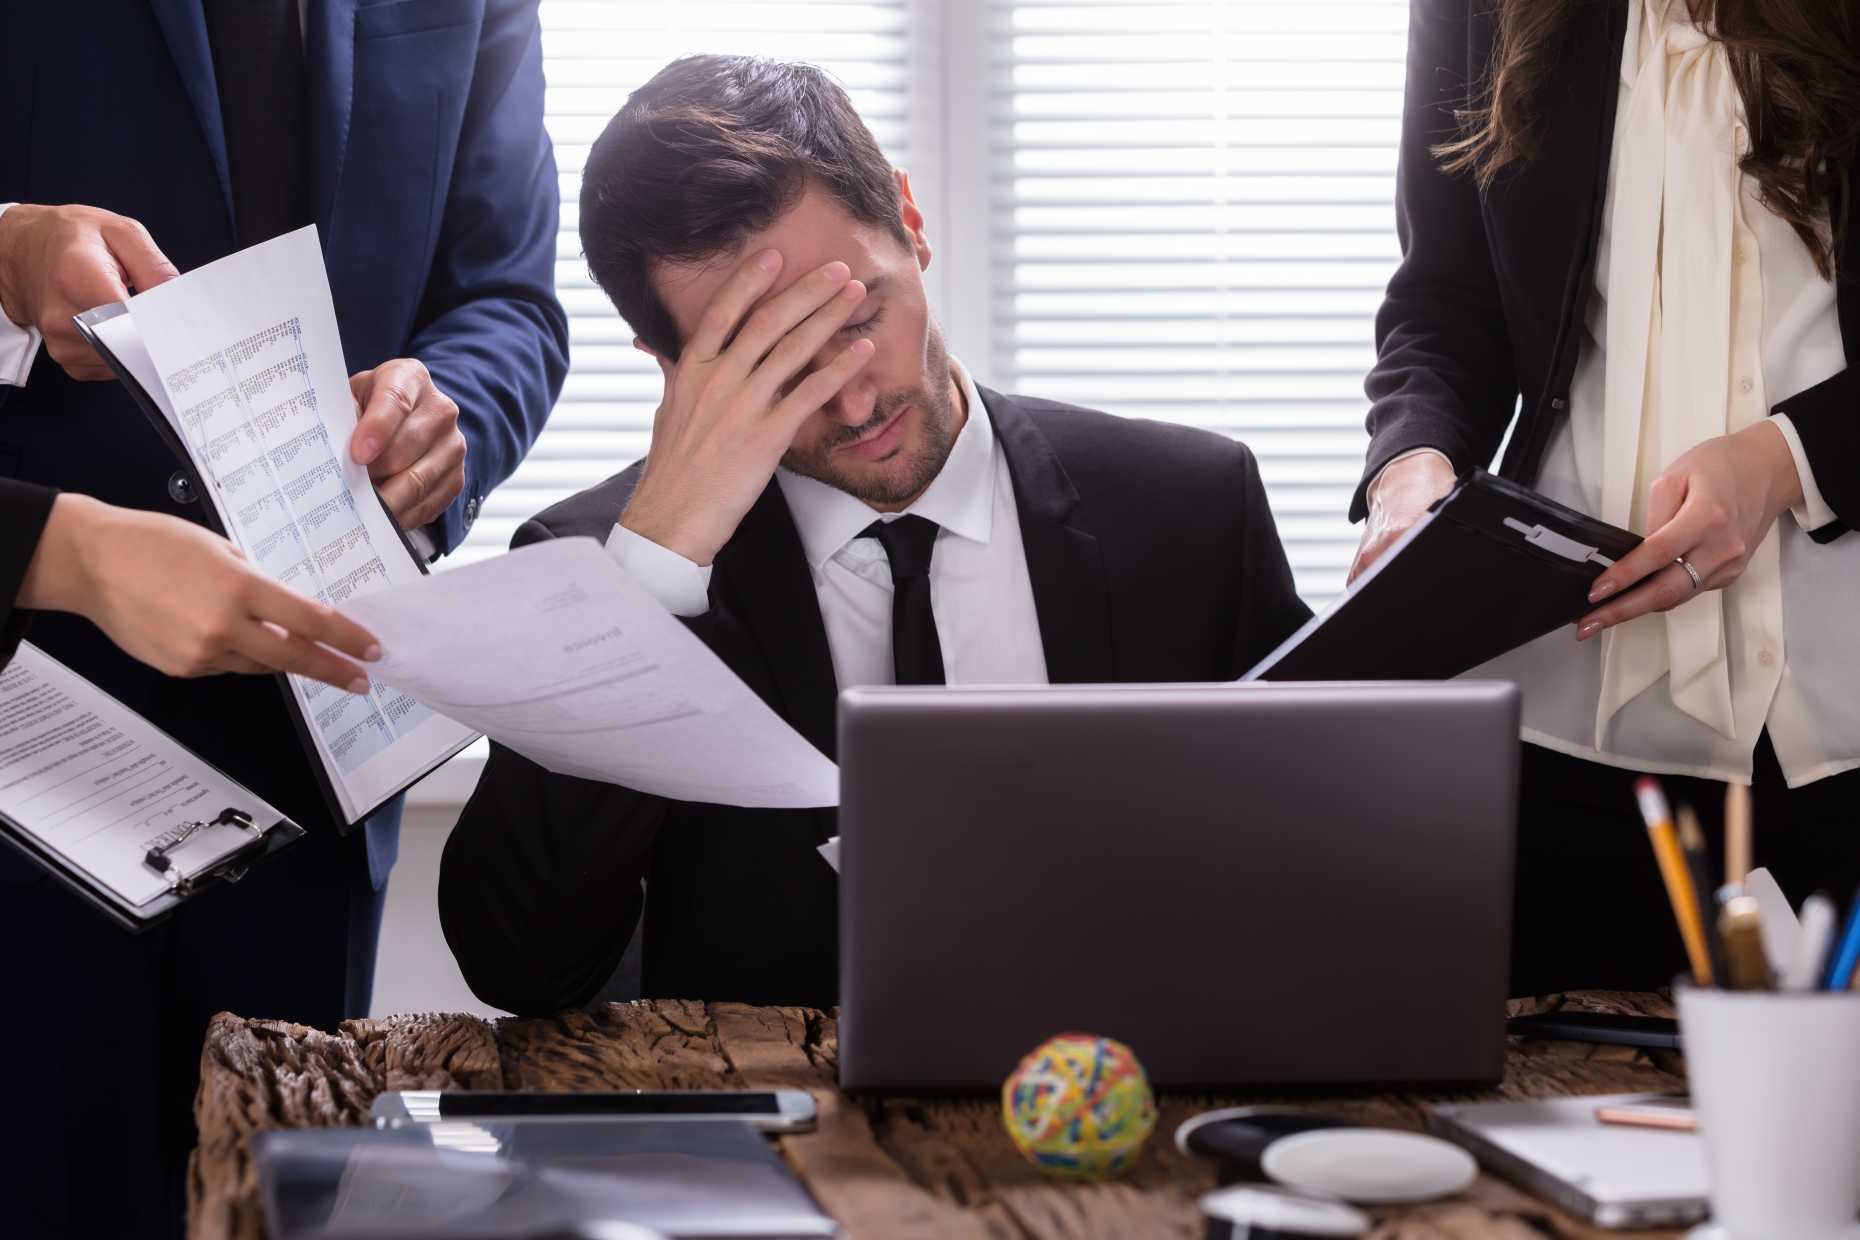 Interruptions by work colleagues can also increase stress levels. (Photograph: Adobe Stock)